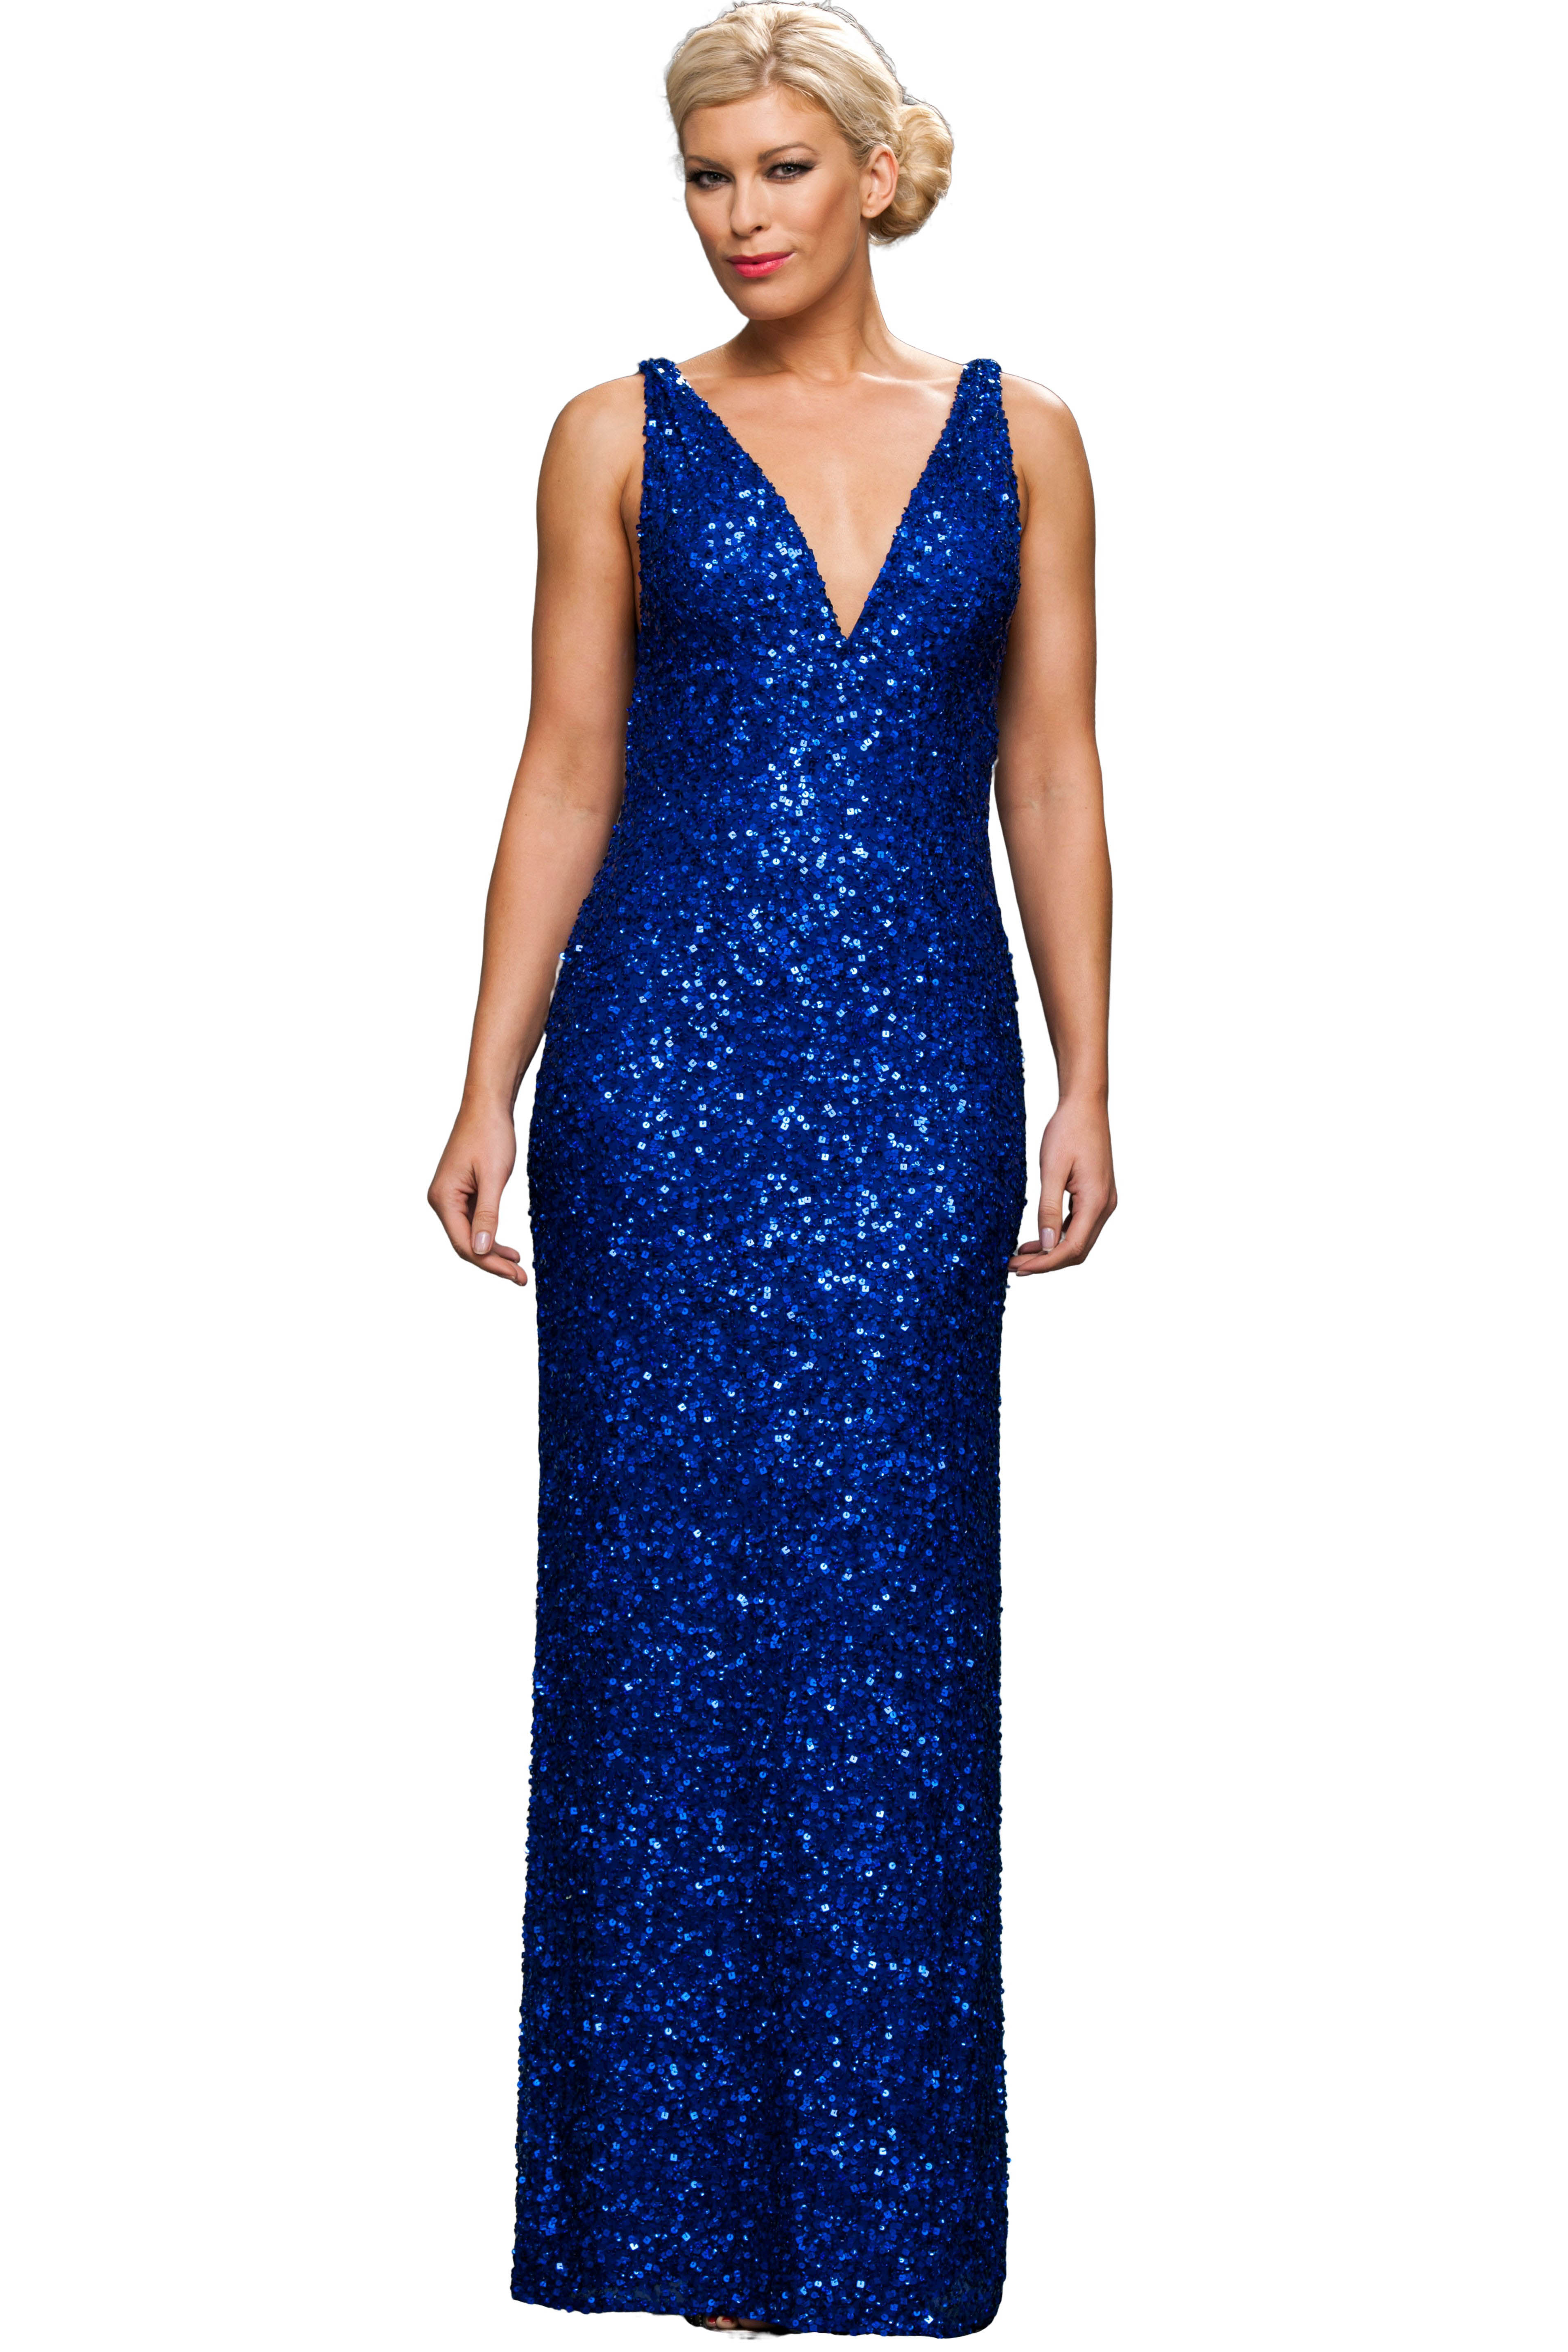 Shop Bariano Lou Lou Glitter V Neck Gown | Miss Savage – Miss Savage Fashion